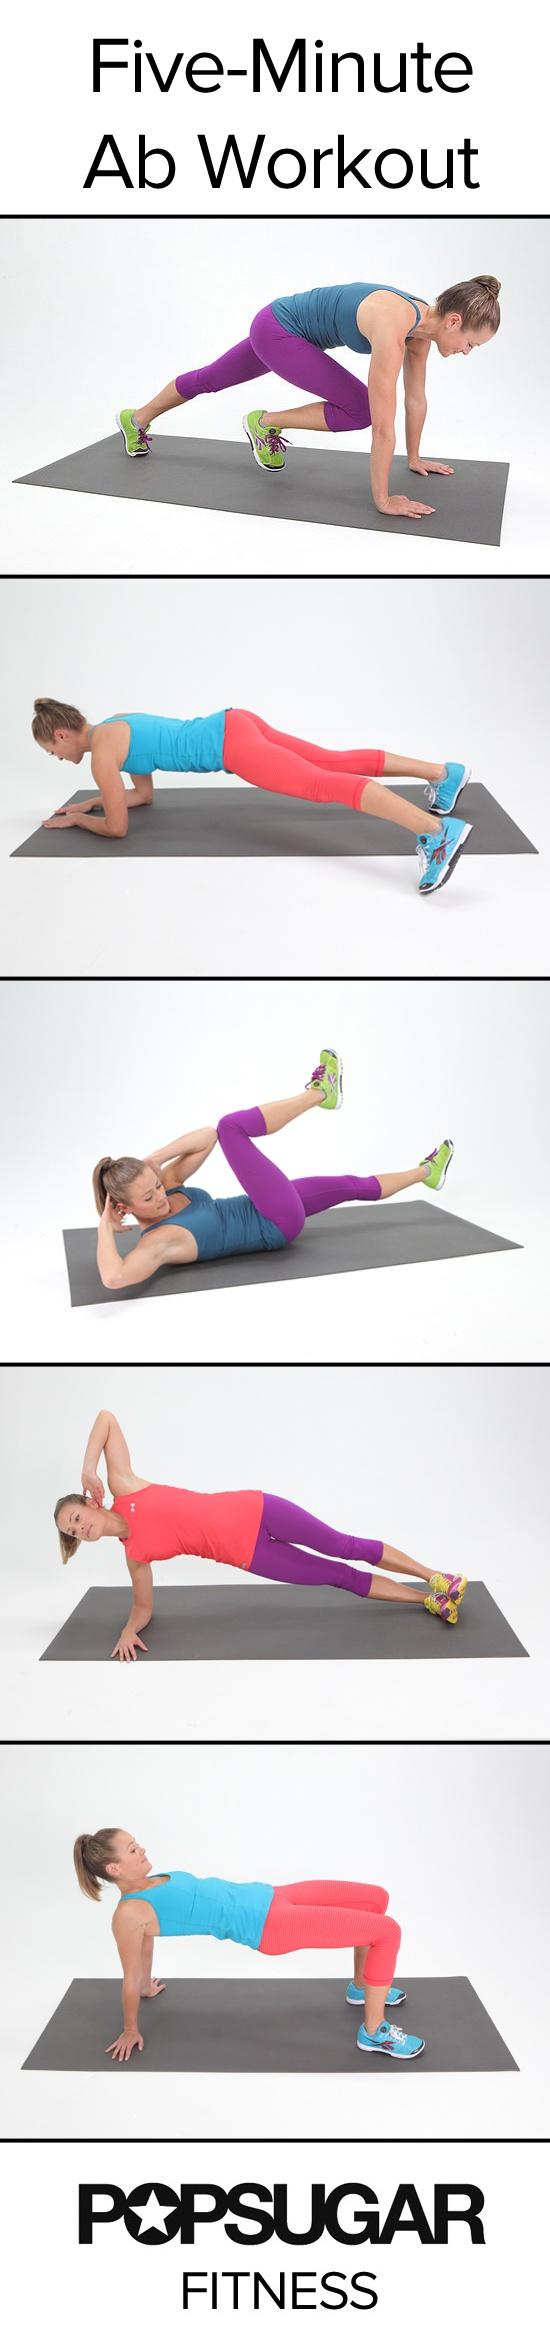 Wedding - Core Connection: 5-Minute Ab Workout